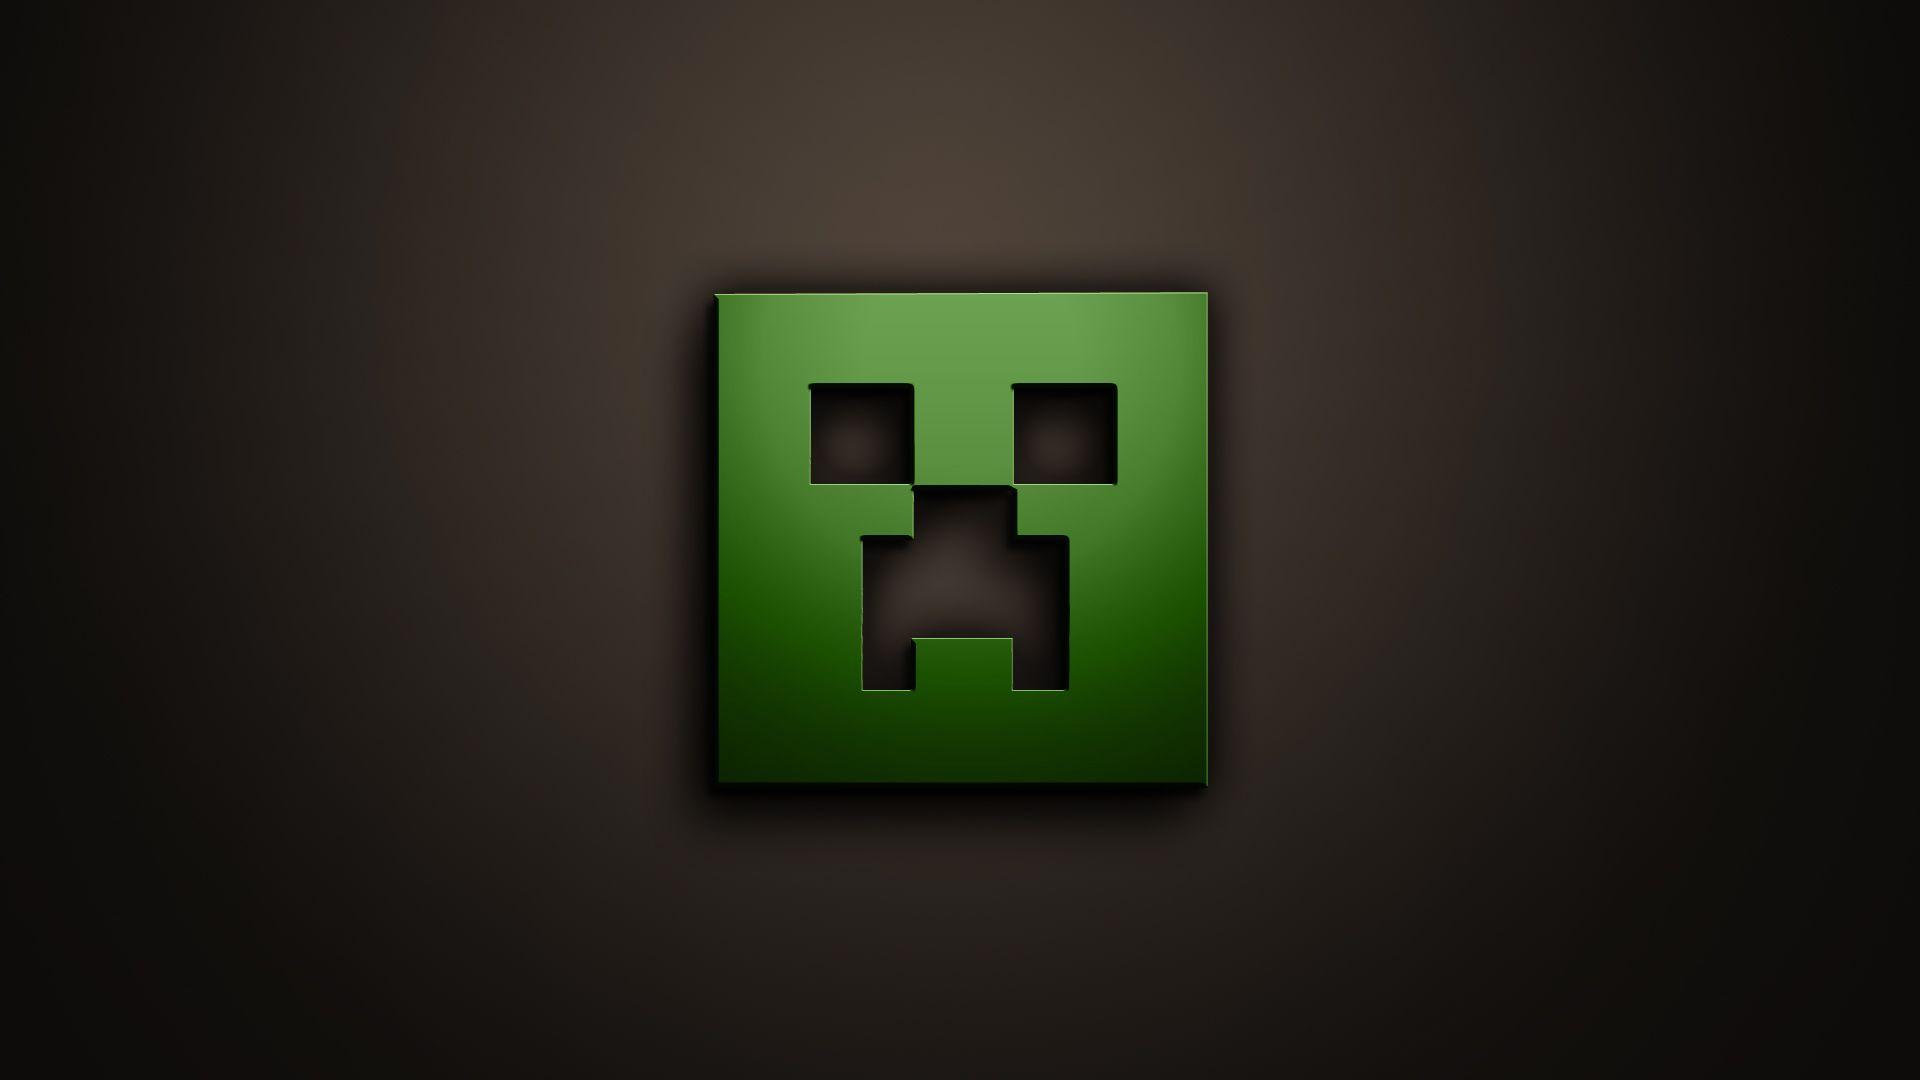 Minecraft Full HD Wallpaper and Background Imagex1080